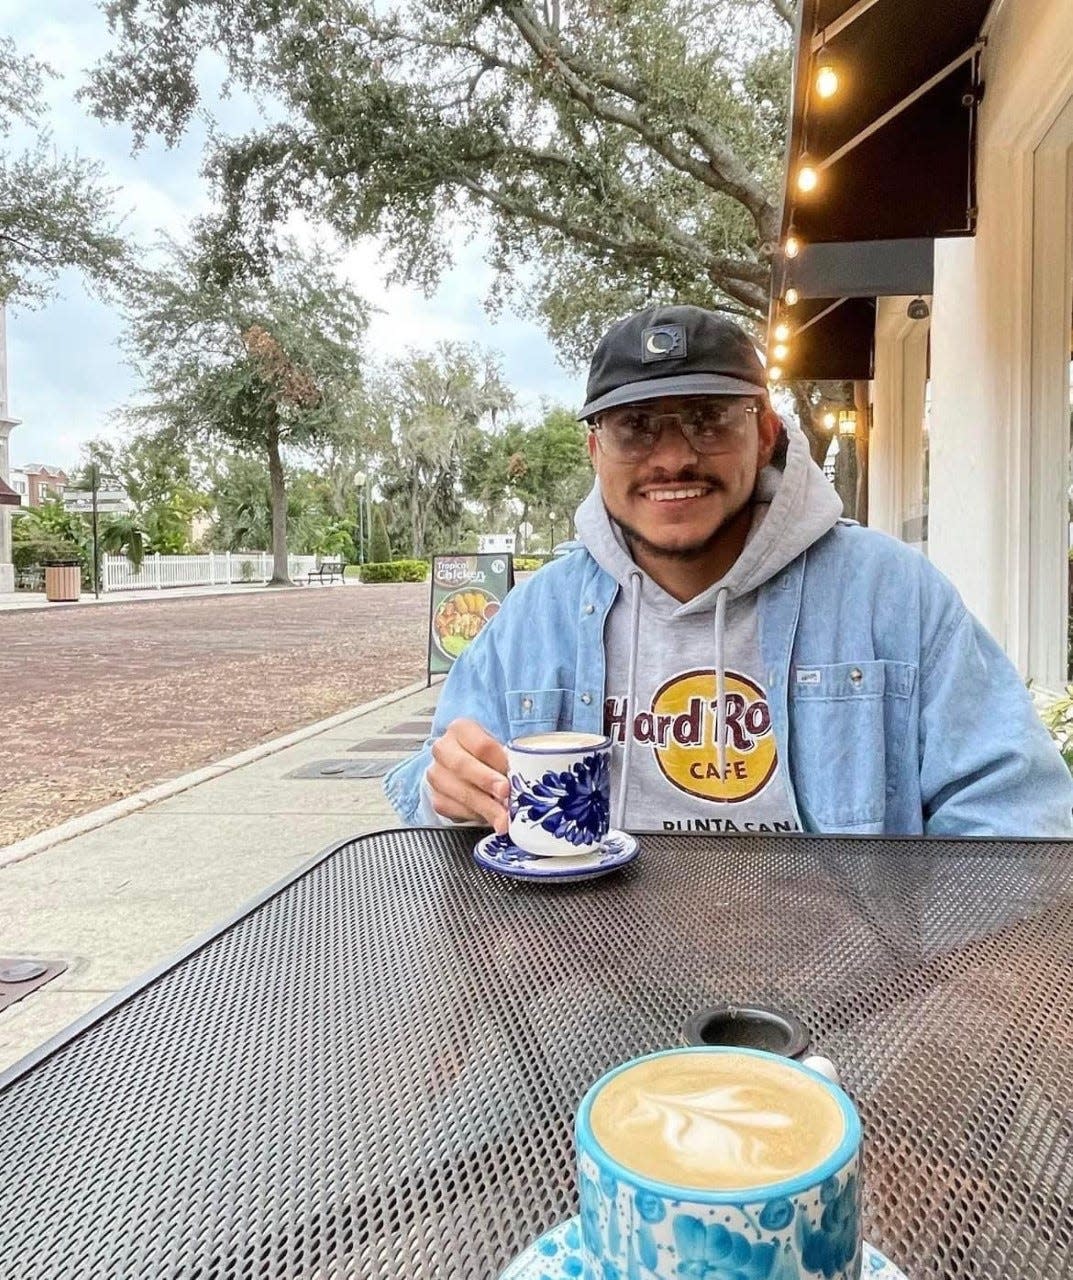 Christian Romero, 23, died Sunday after a negligent motorist struck his vehicle in Orlando. Residents of Flagler Beach, where Romero's parents run a restaurant, have rallied around the Romero family.